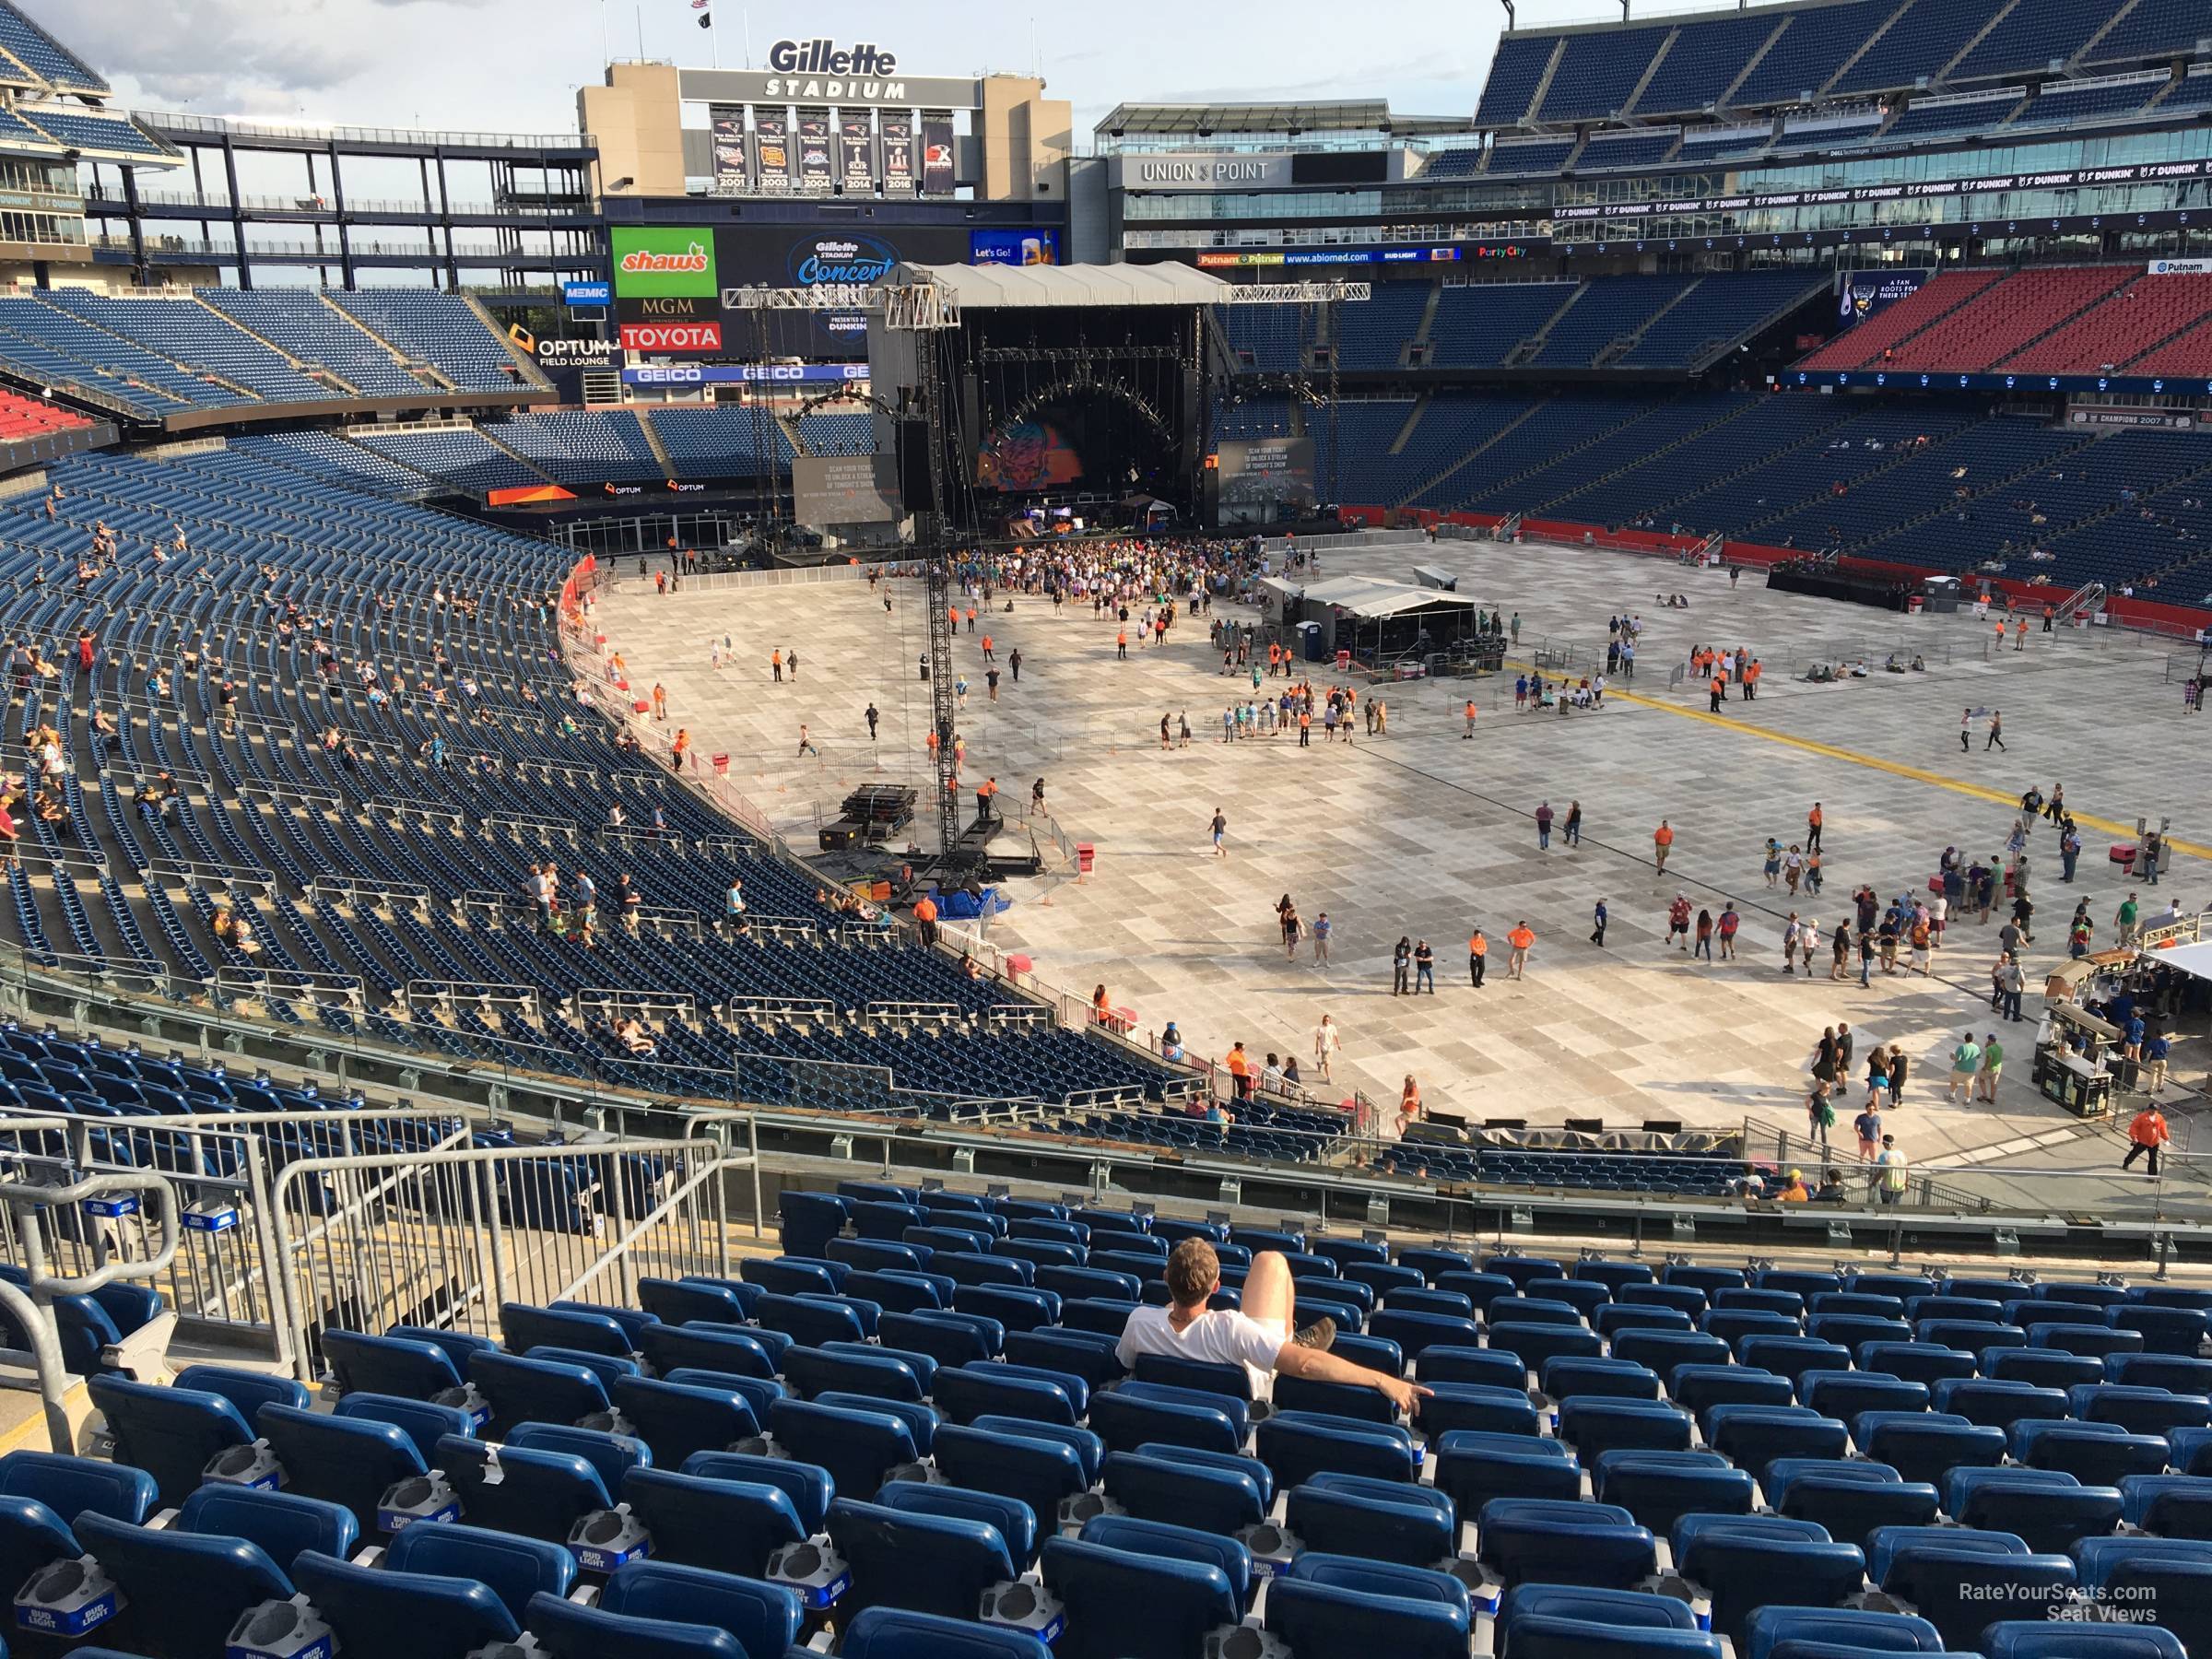 Section 202 at Gillette Stadium